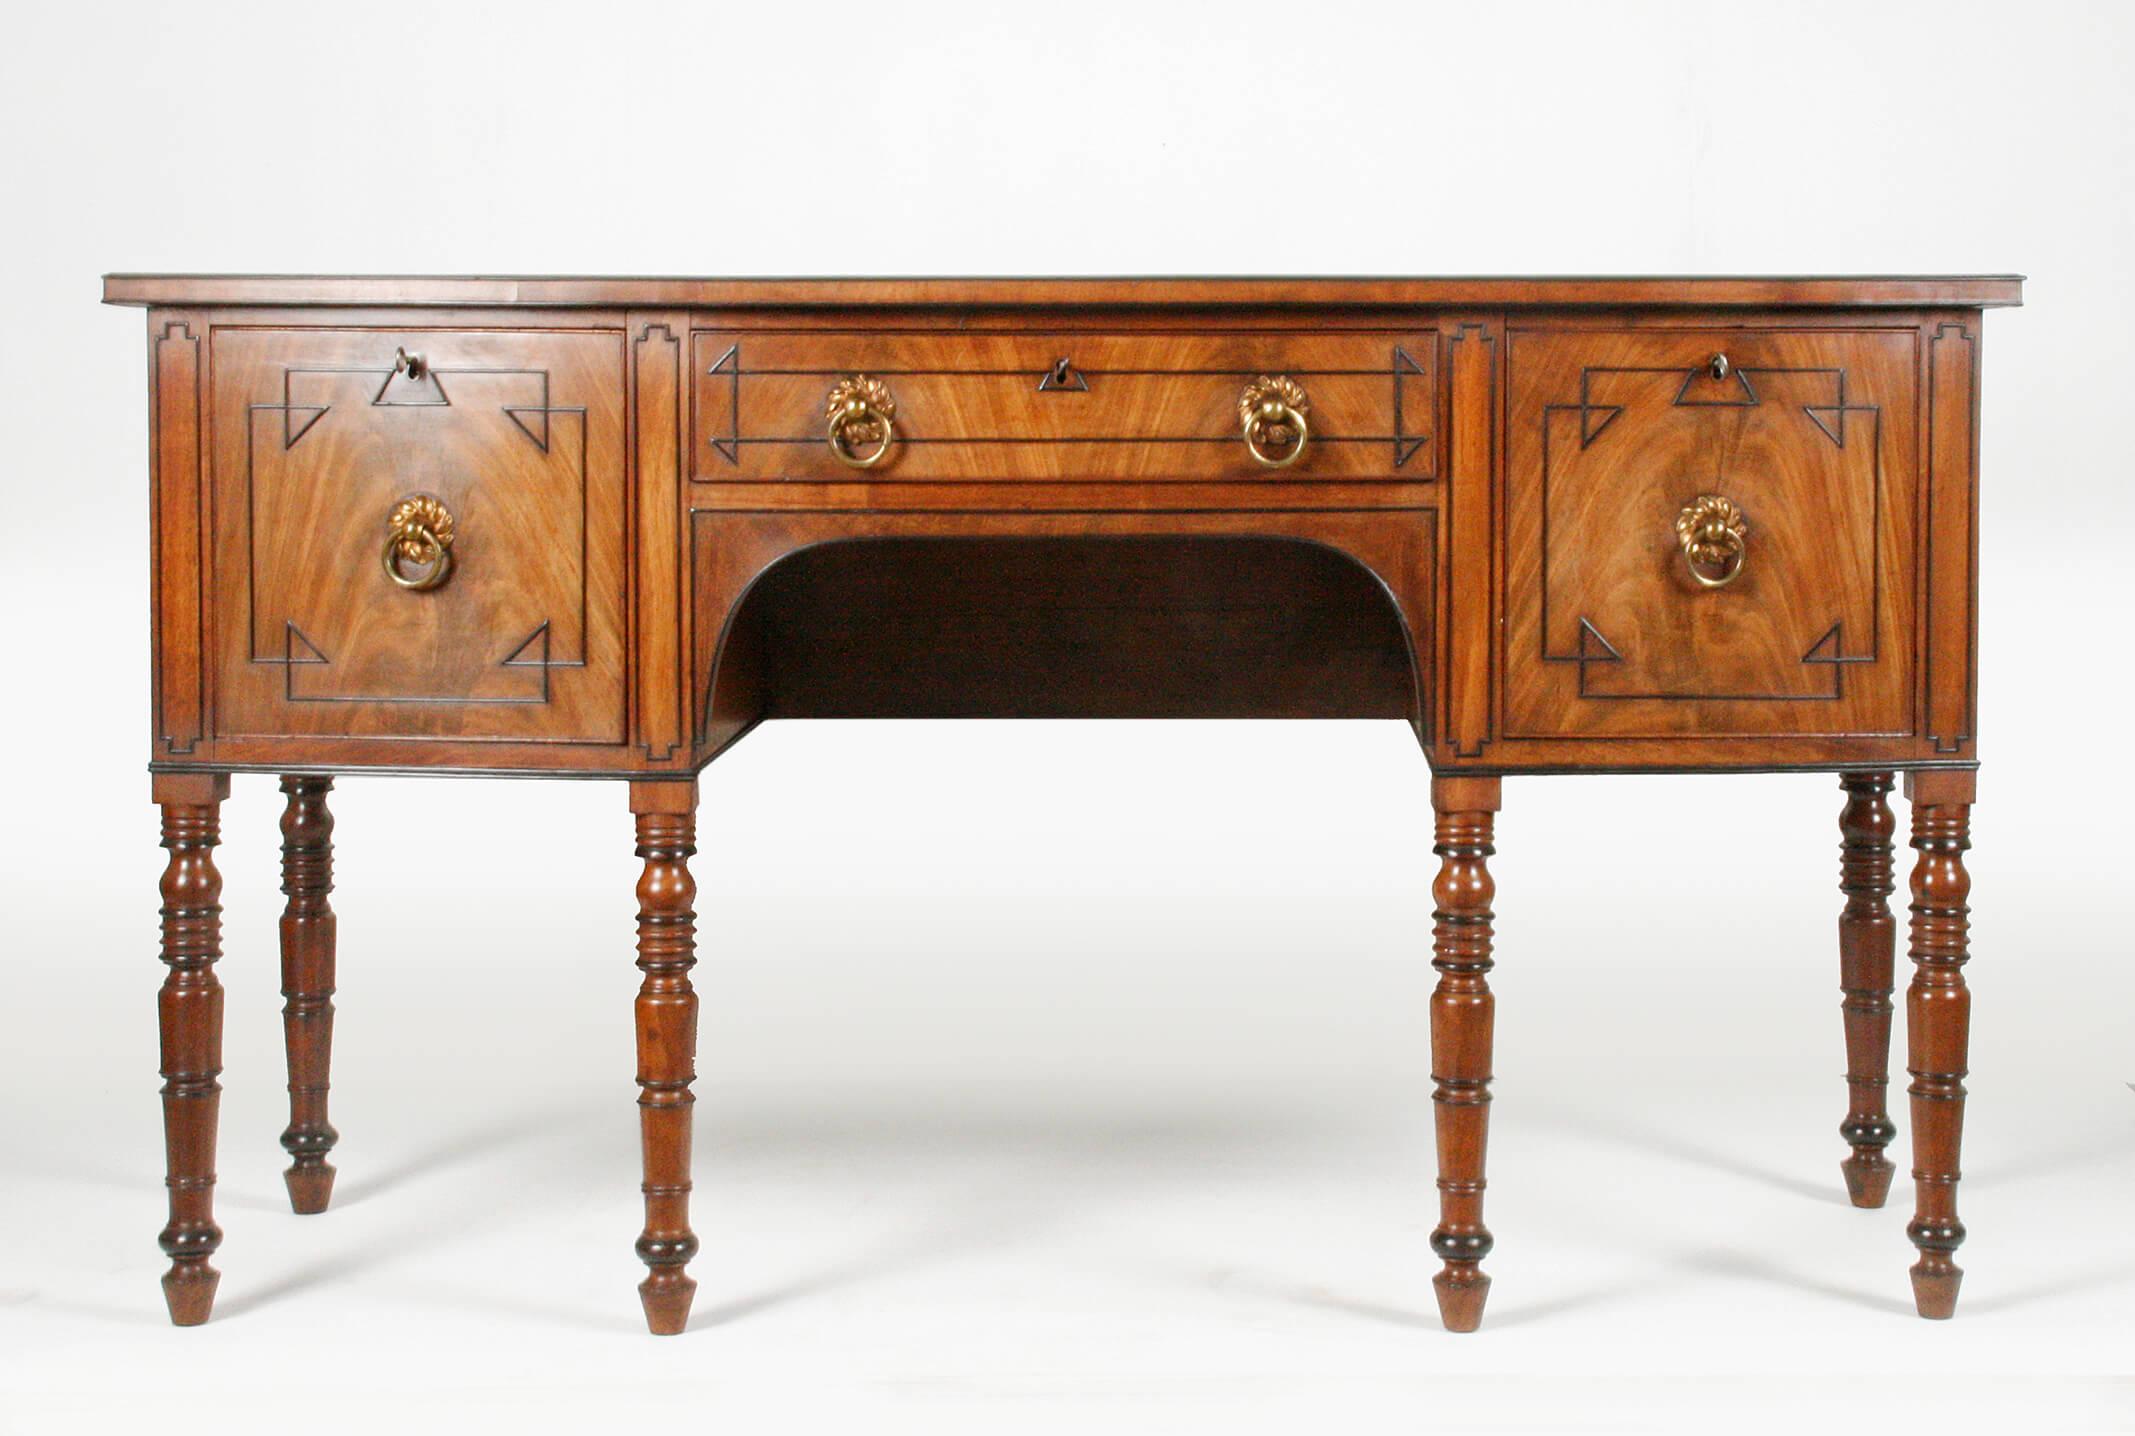 George III Late 18th Century Georgian English Bow Front Sideboard For Sale